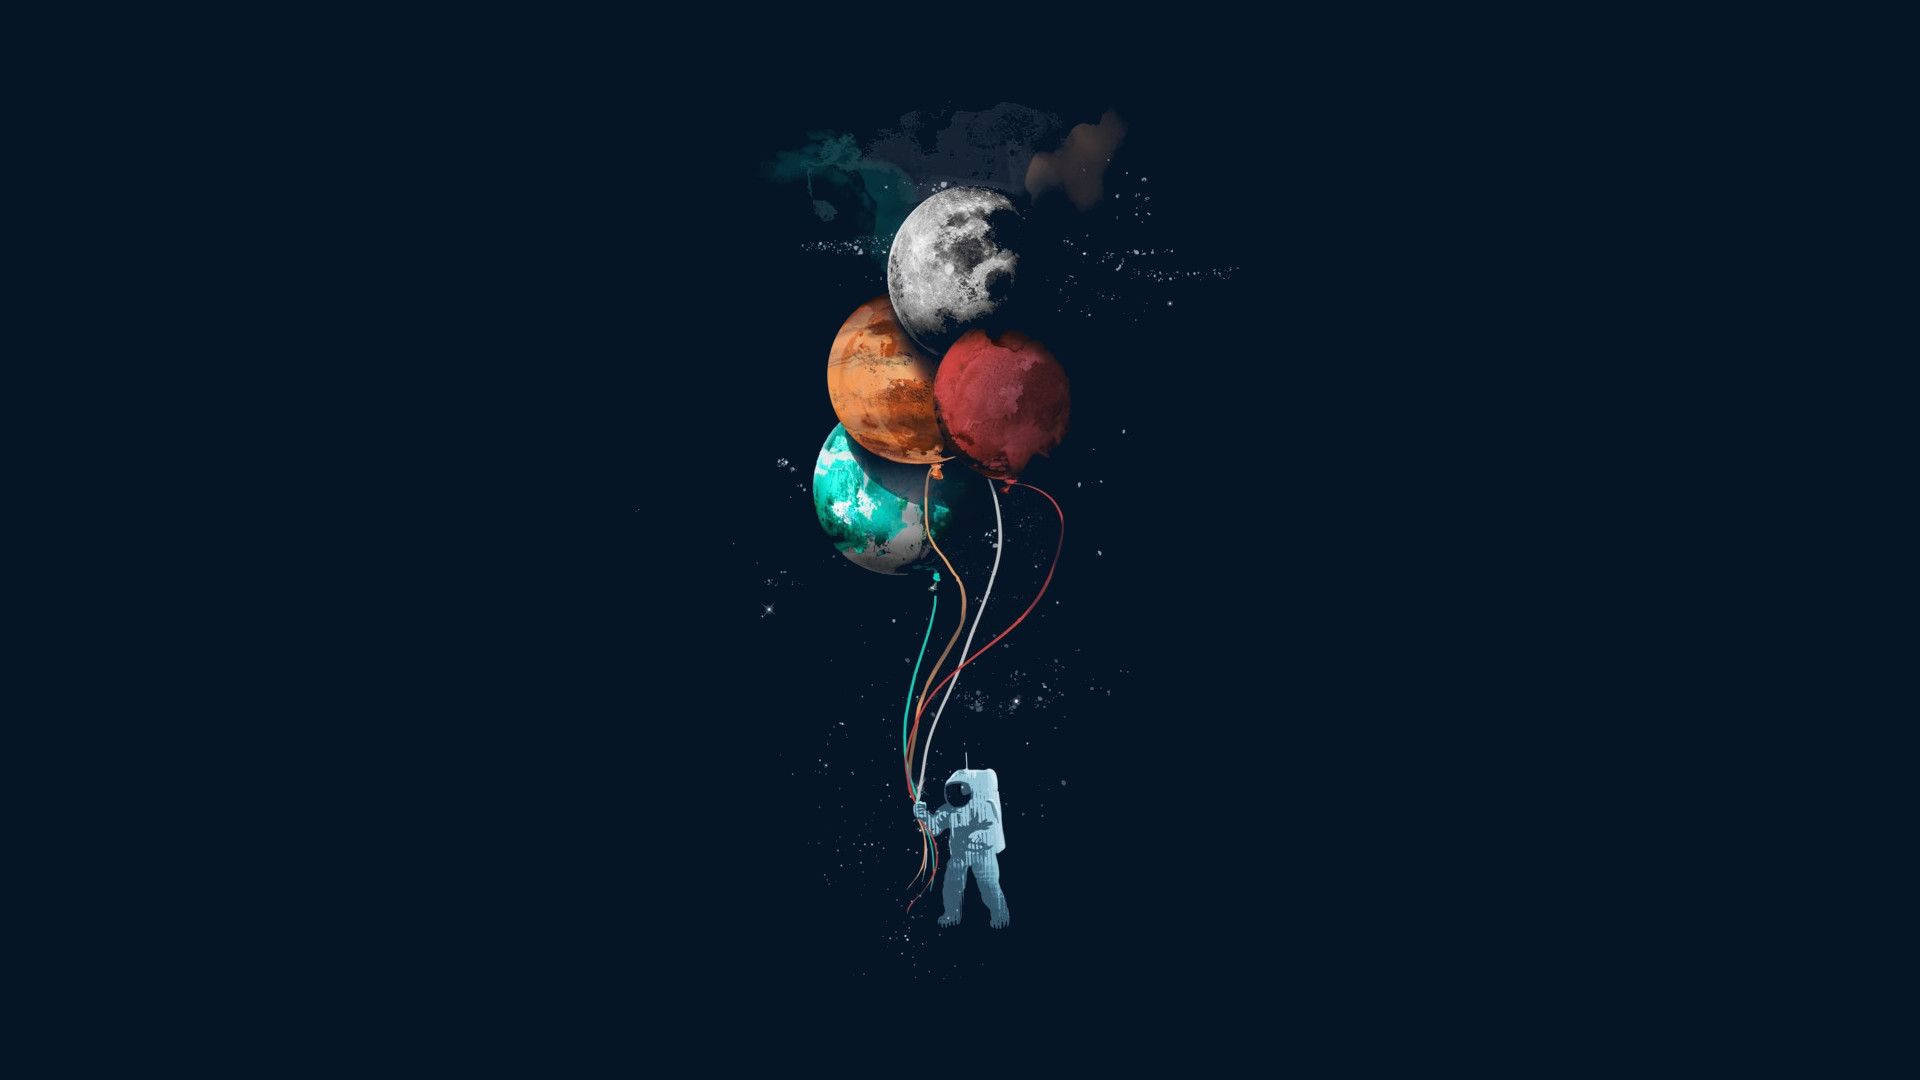 Cute Astronaut Balloon Planets Background